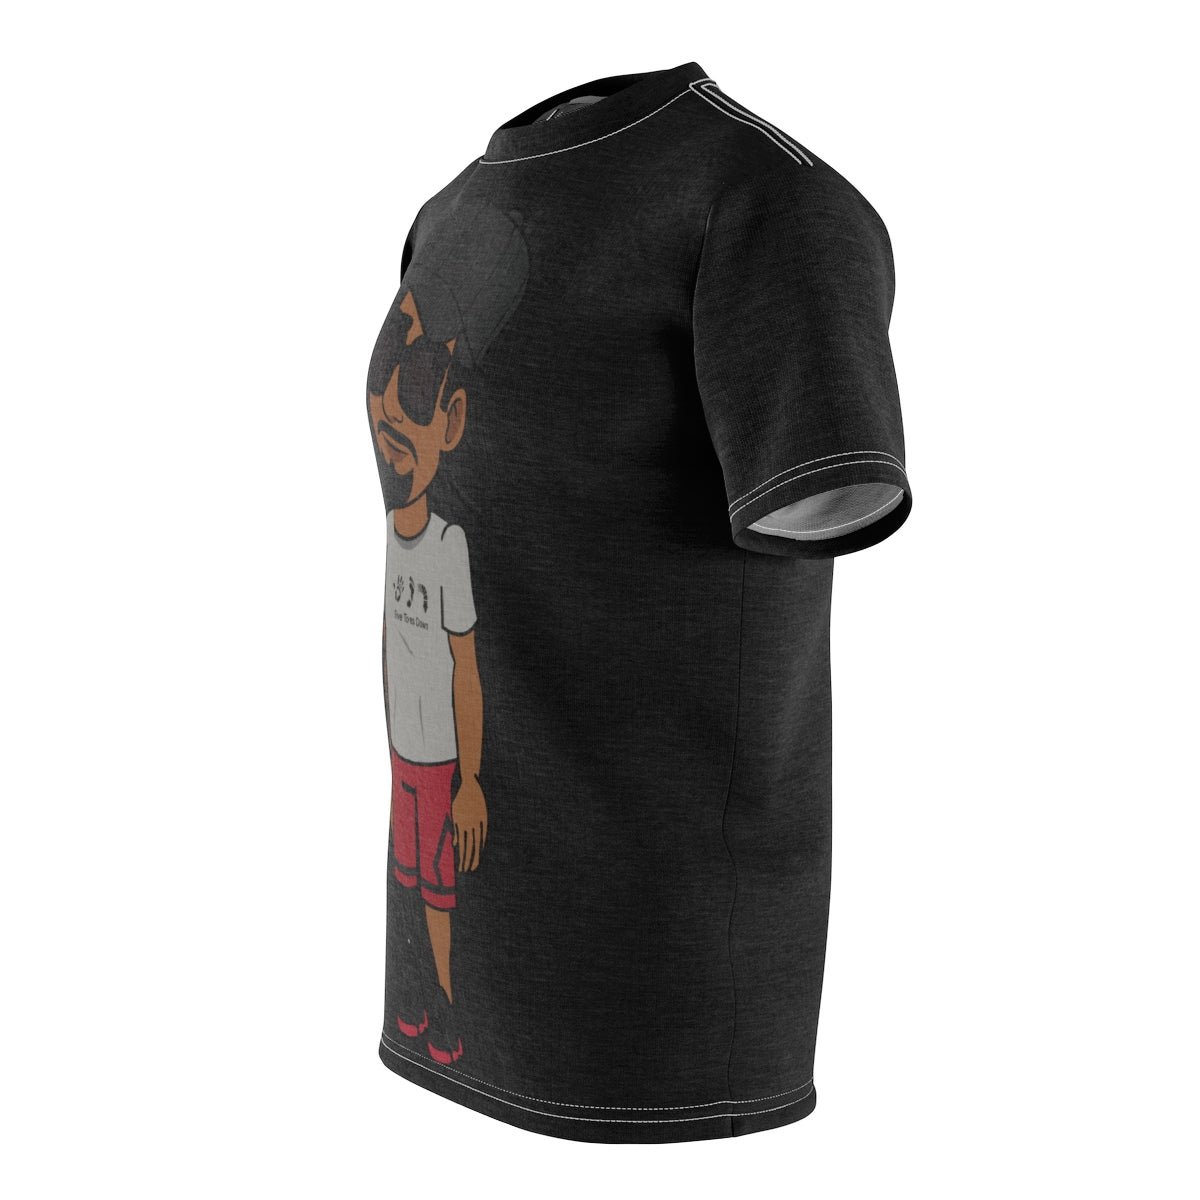 Five Toes Down Henry Blk Unisex Cut & Sew Tee